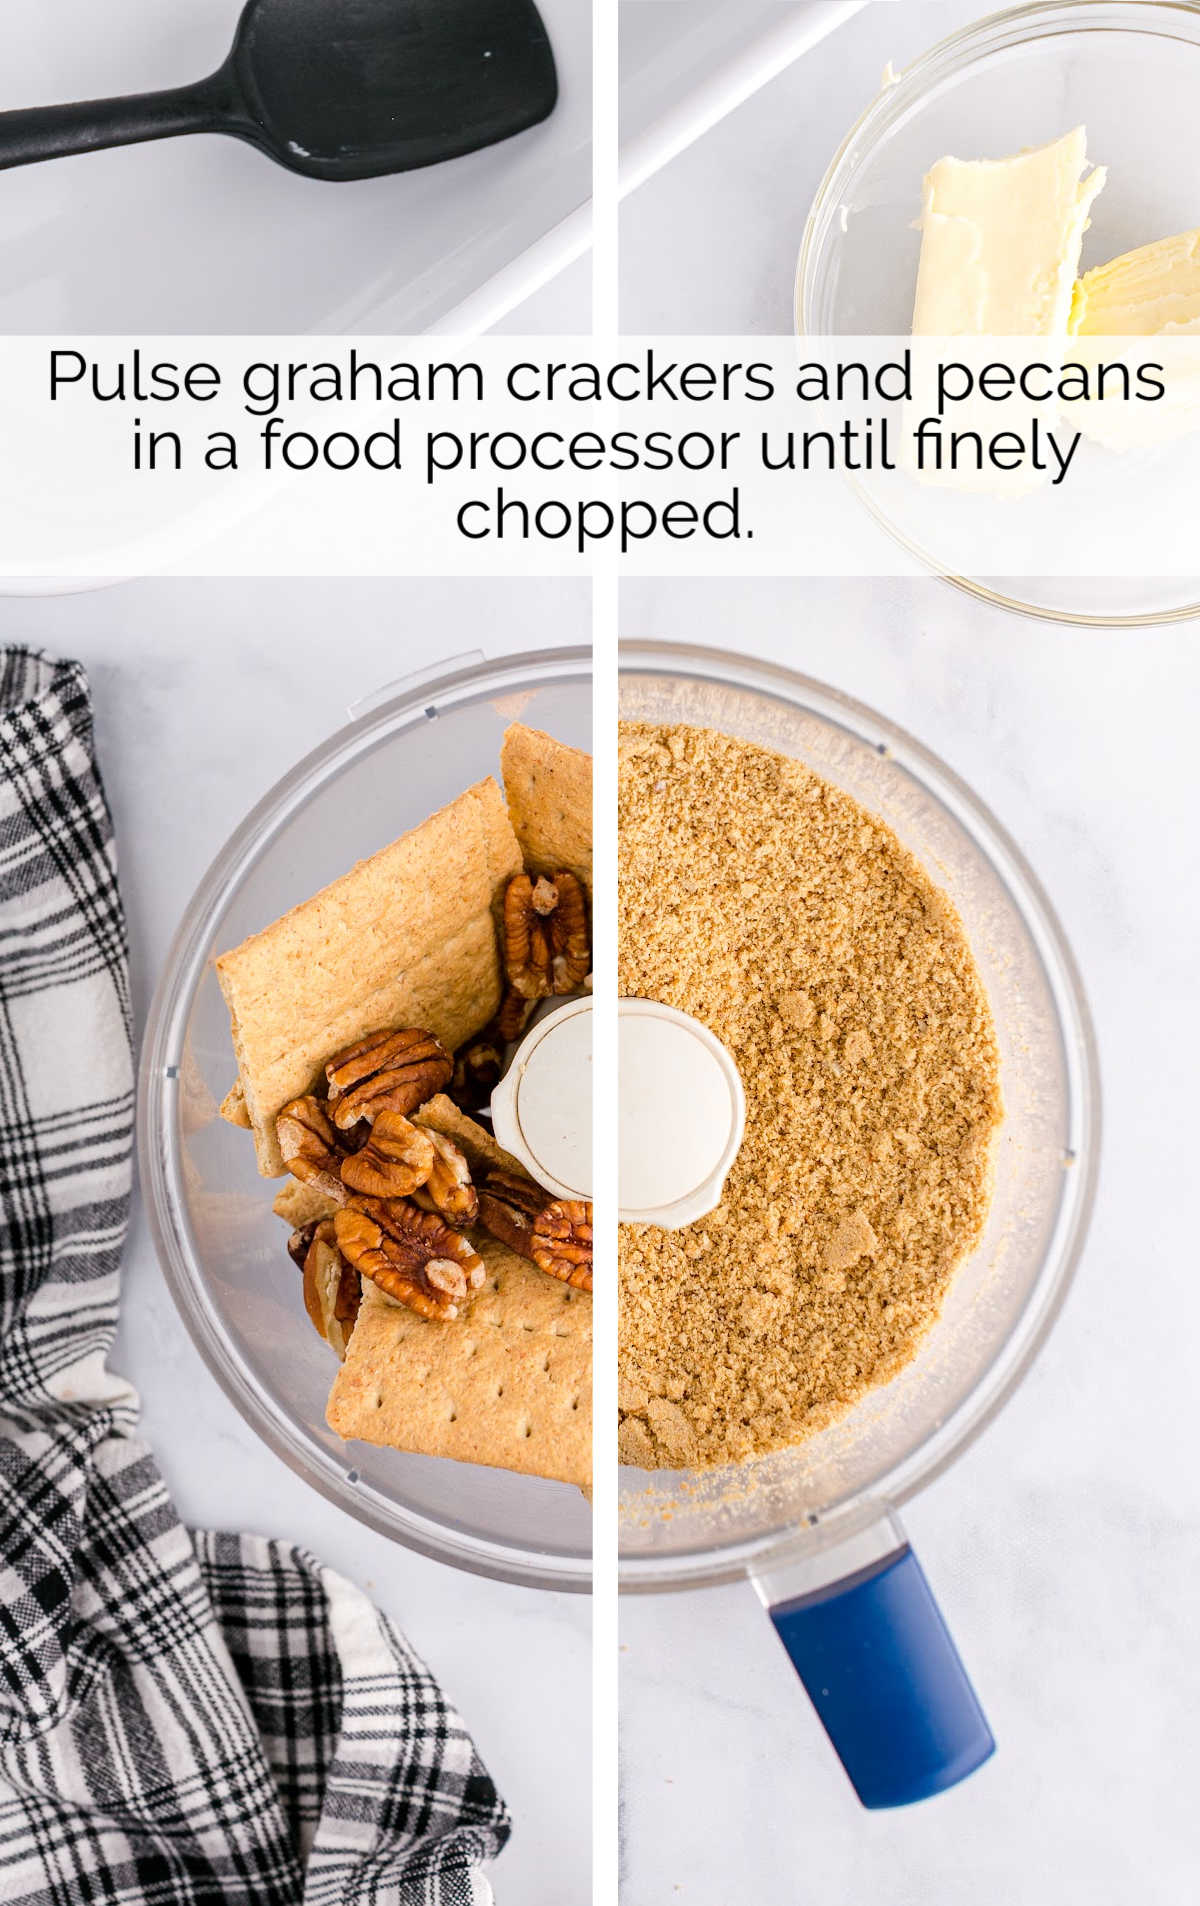 graham crackers and pecans mixed together and then blended